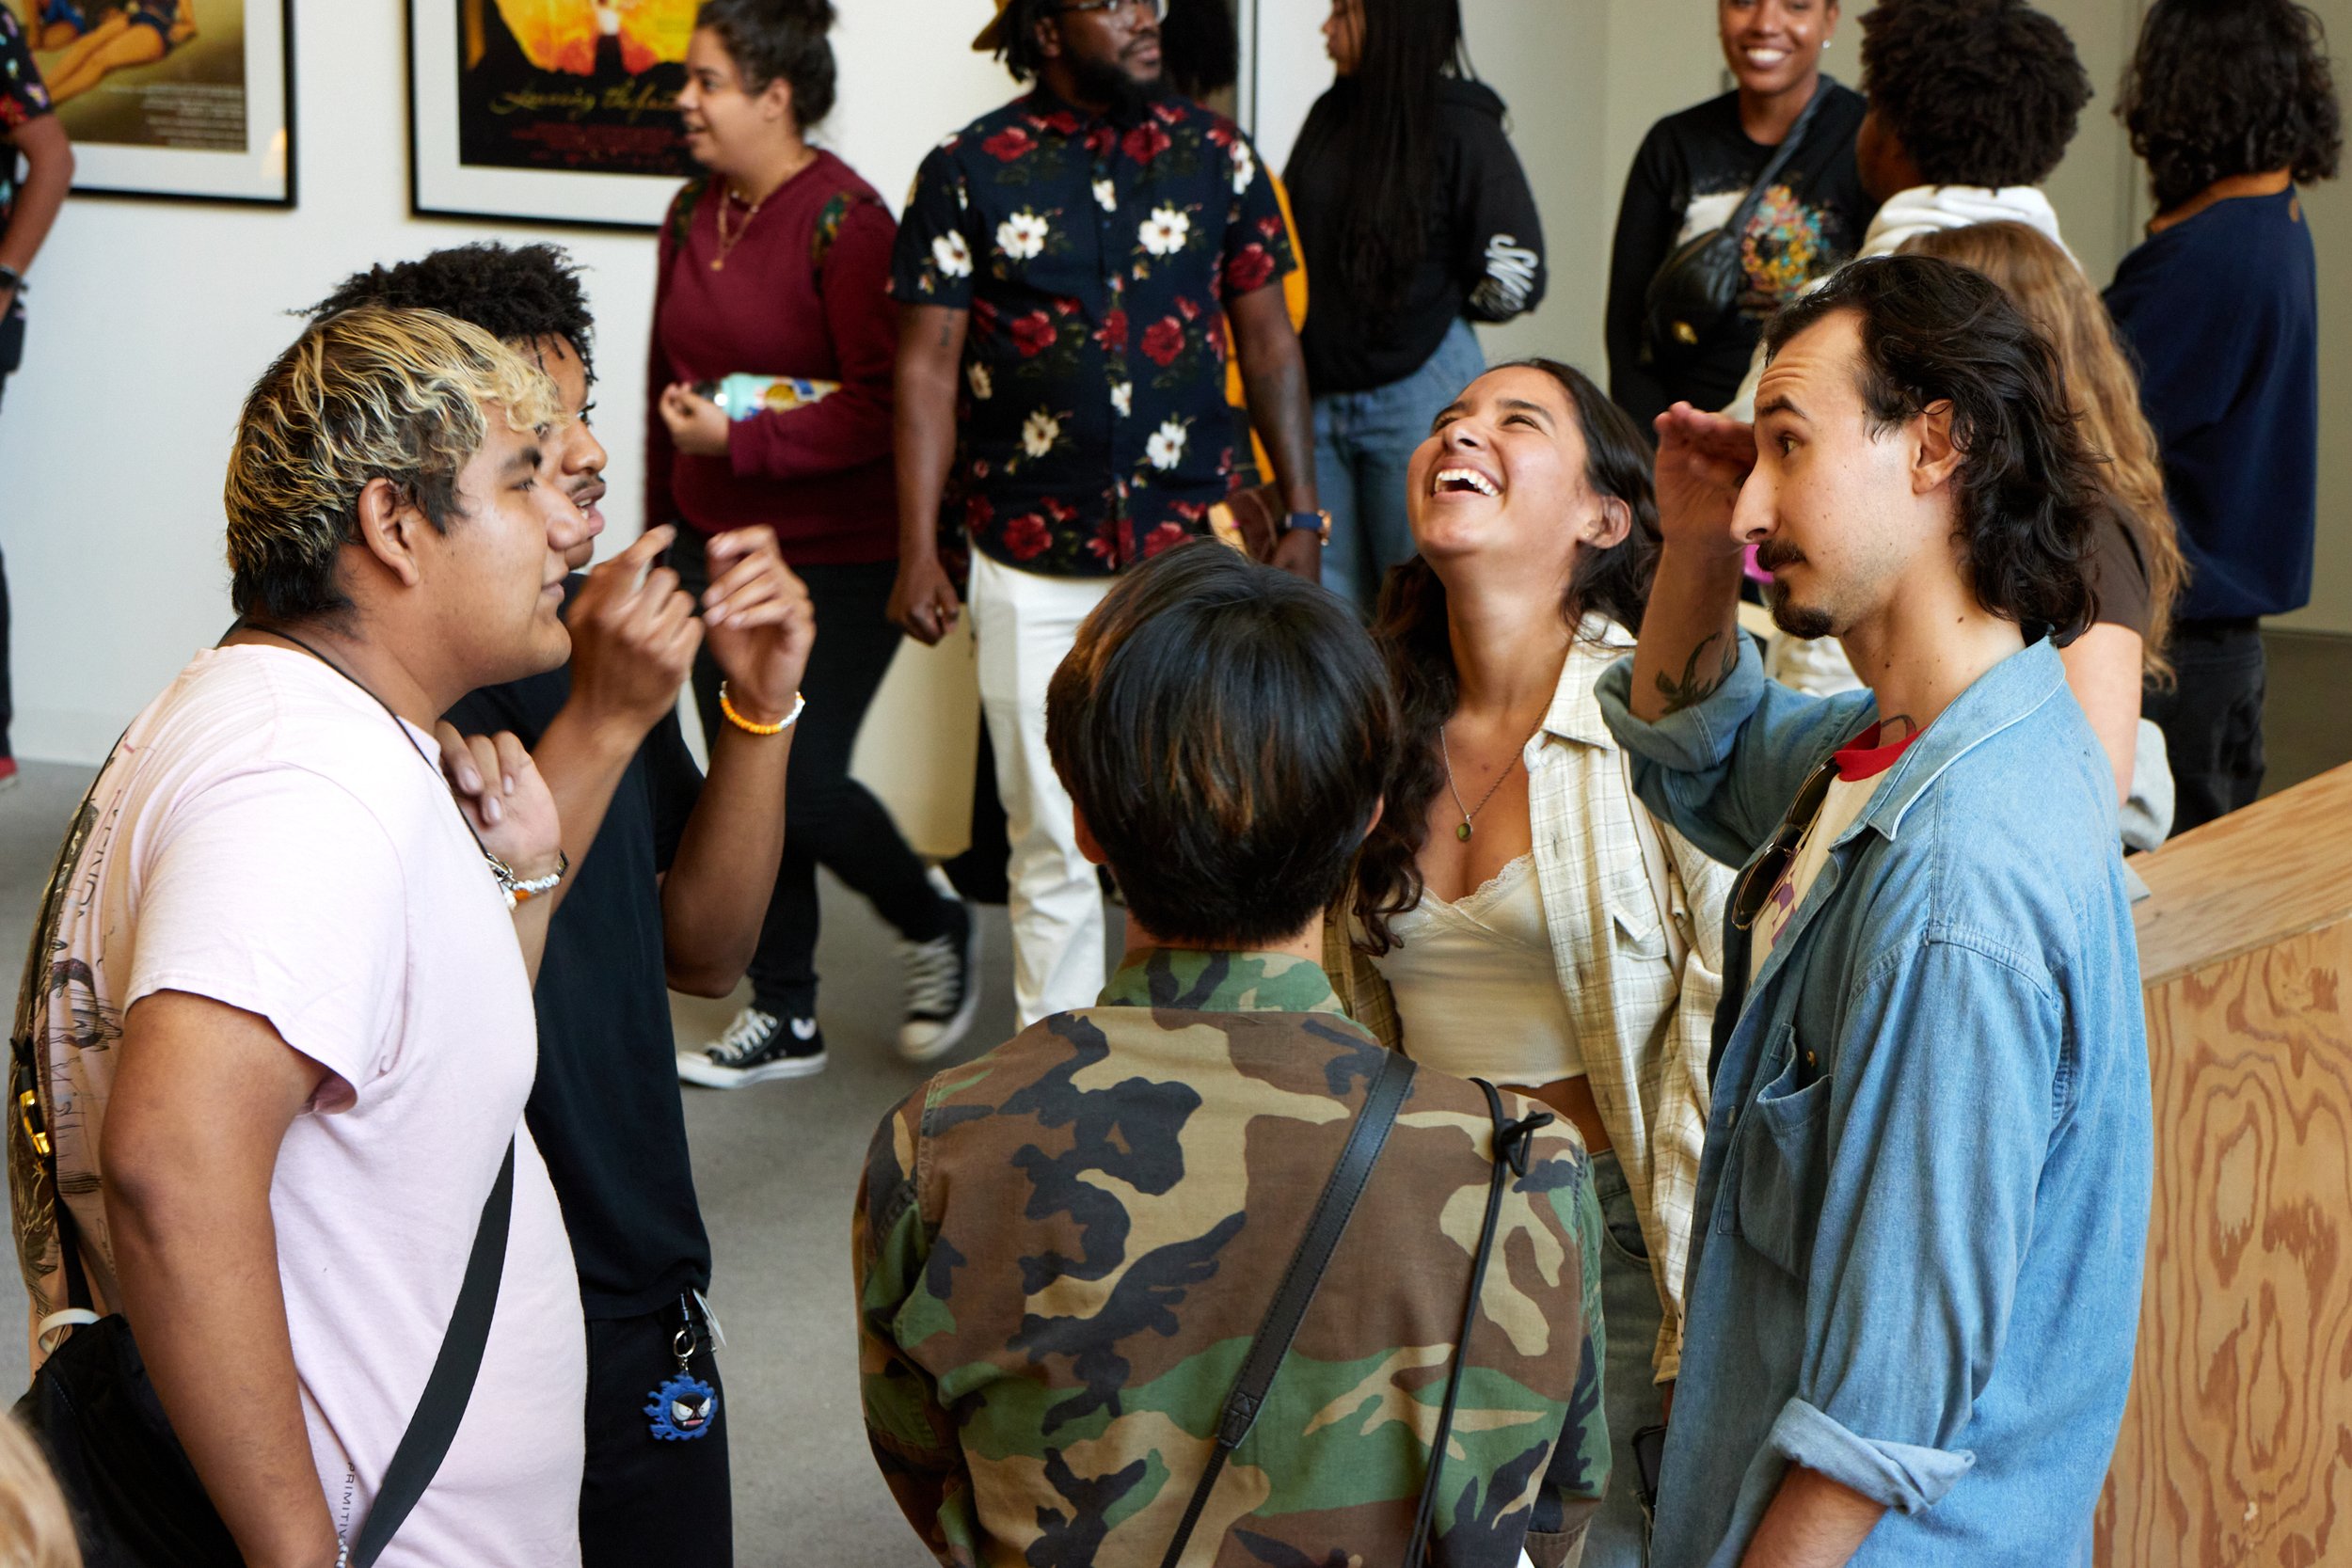  A group converses among themselves in the lobby of Santa Monica College Center for Media and Design, Santa Monica, Calif. on Sept. 15, 2023. They are waiting for the screening of the feature film "It Lives Inside" to start. (Danniel Sumarkho | The C